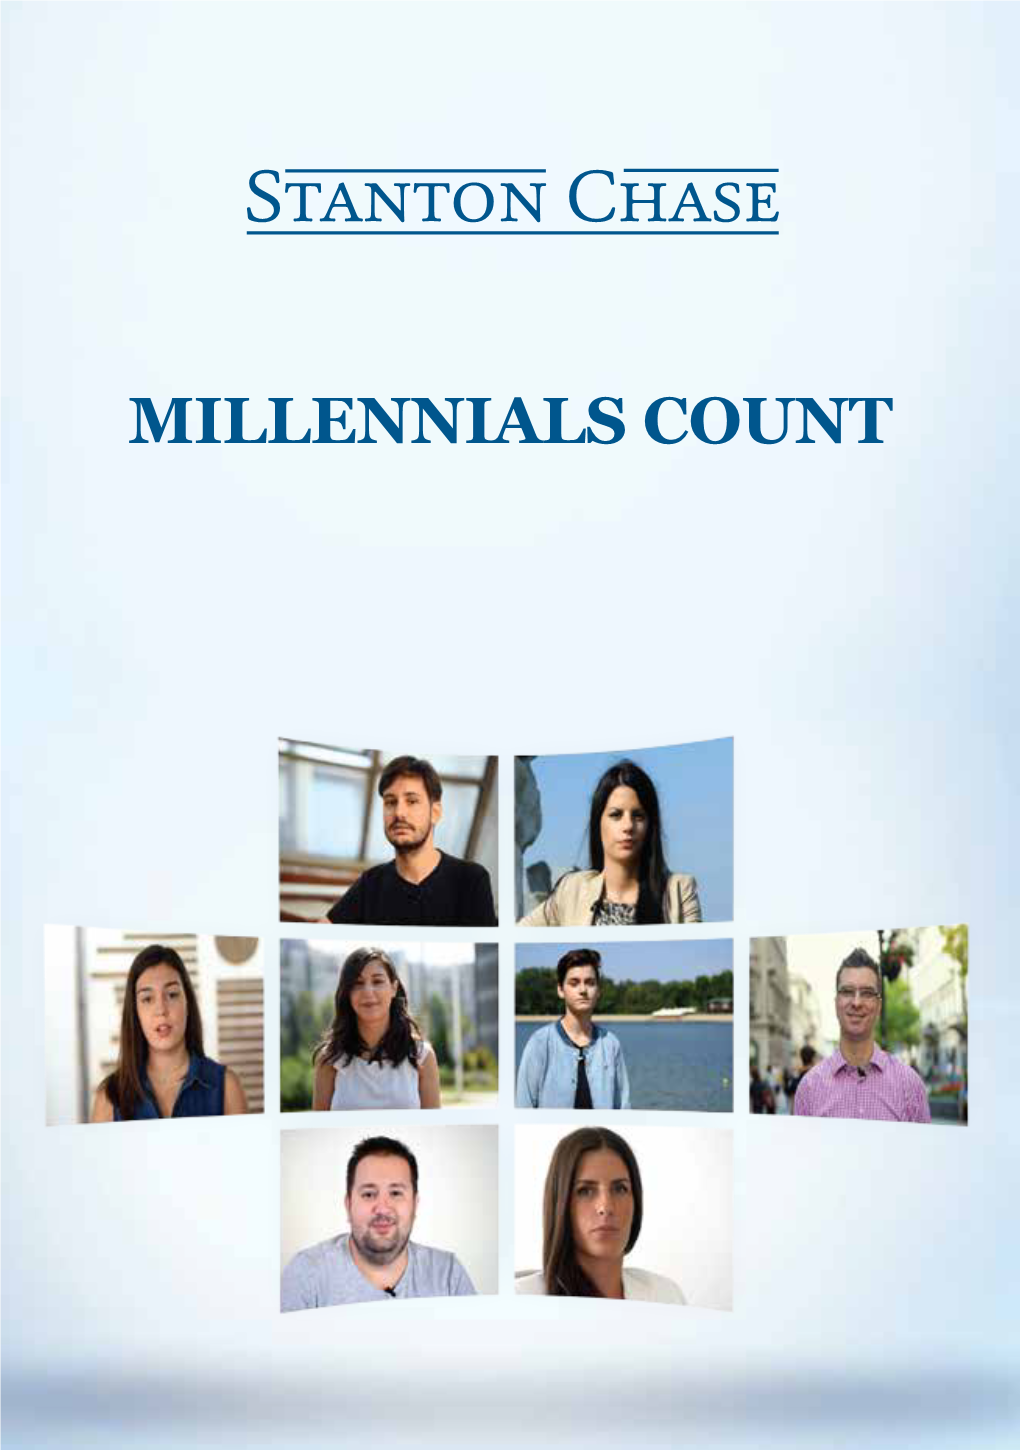 Millennials Count Millennials Count Millennials Count